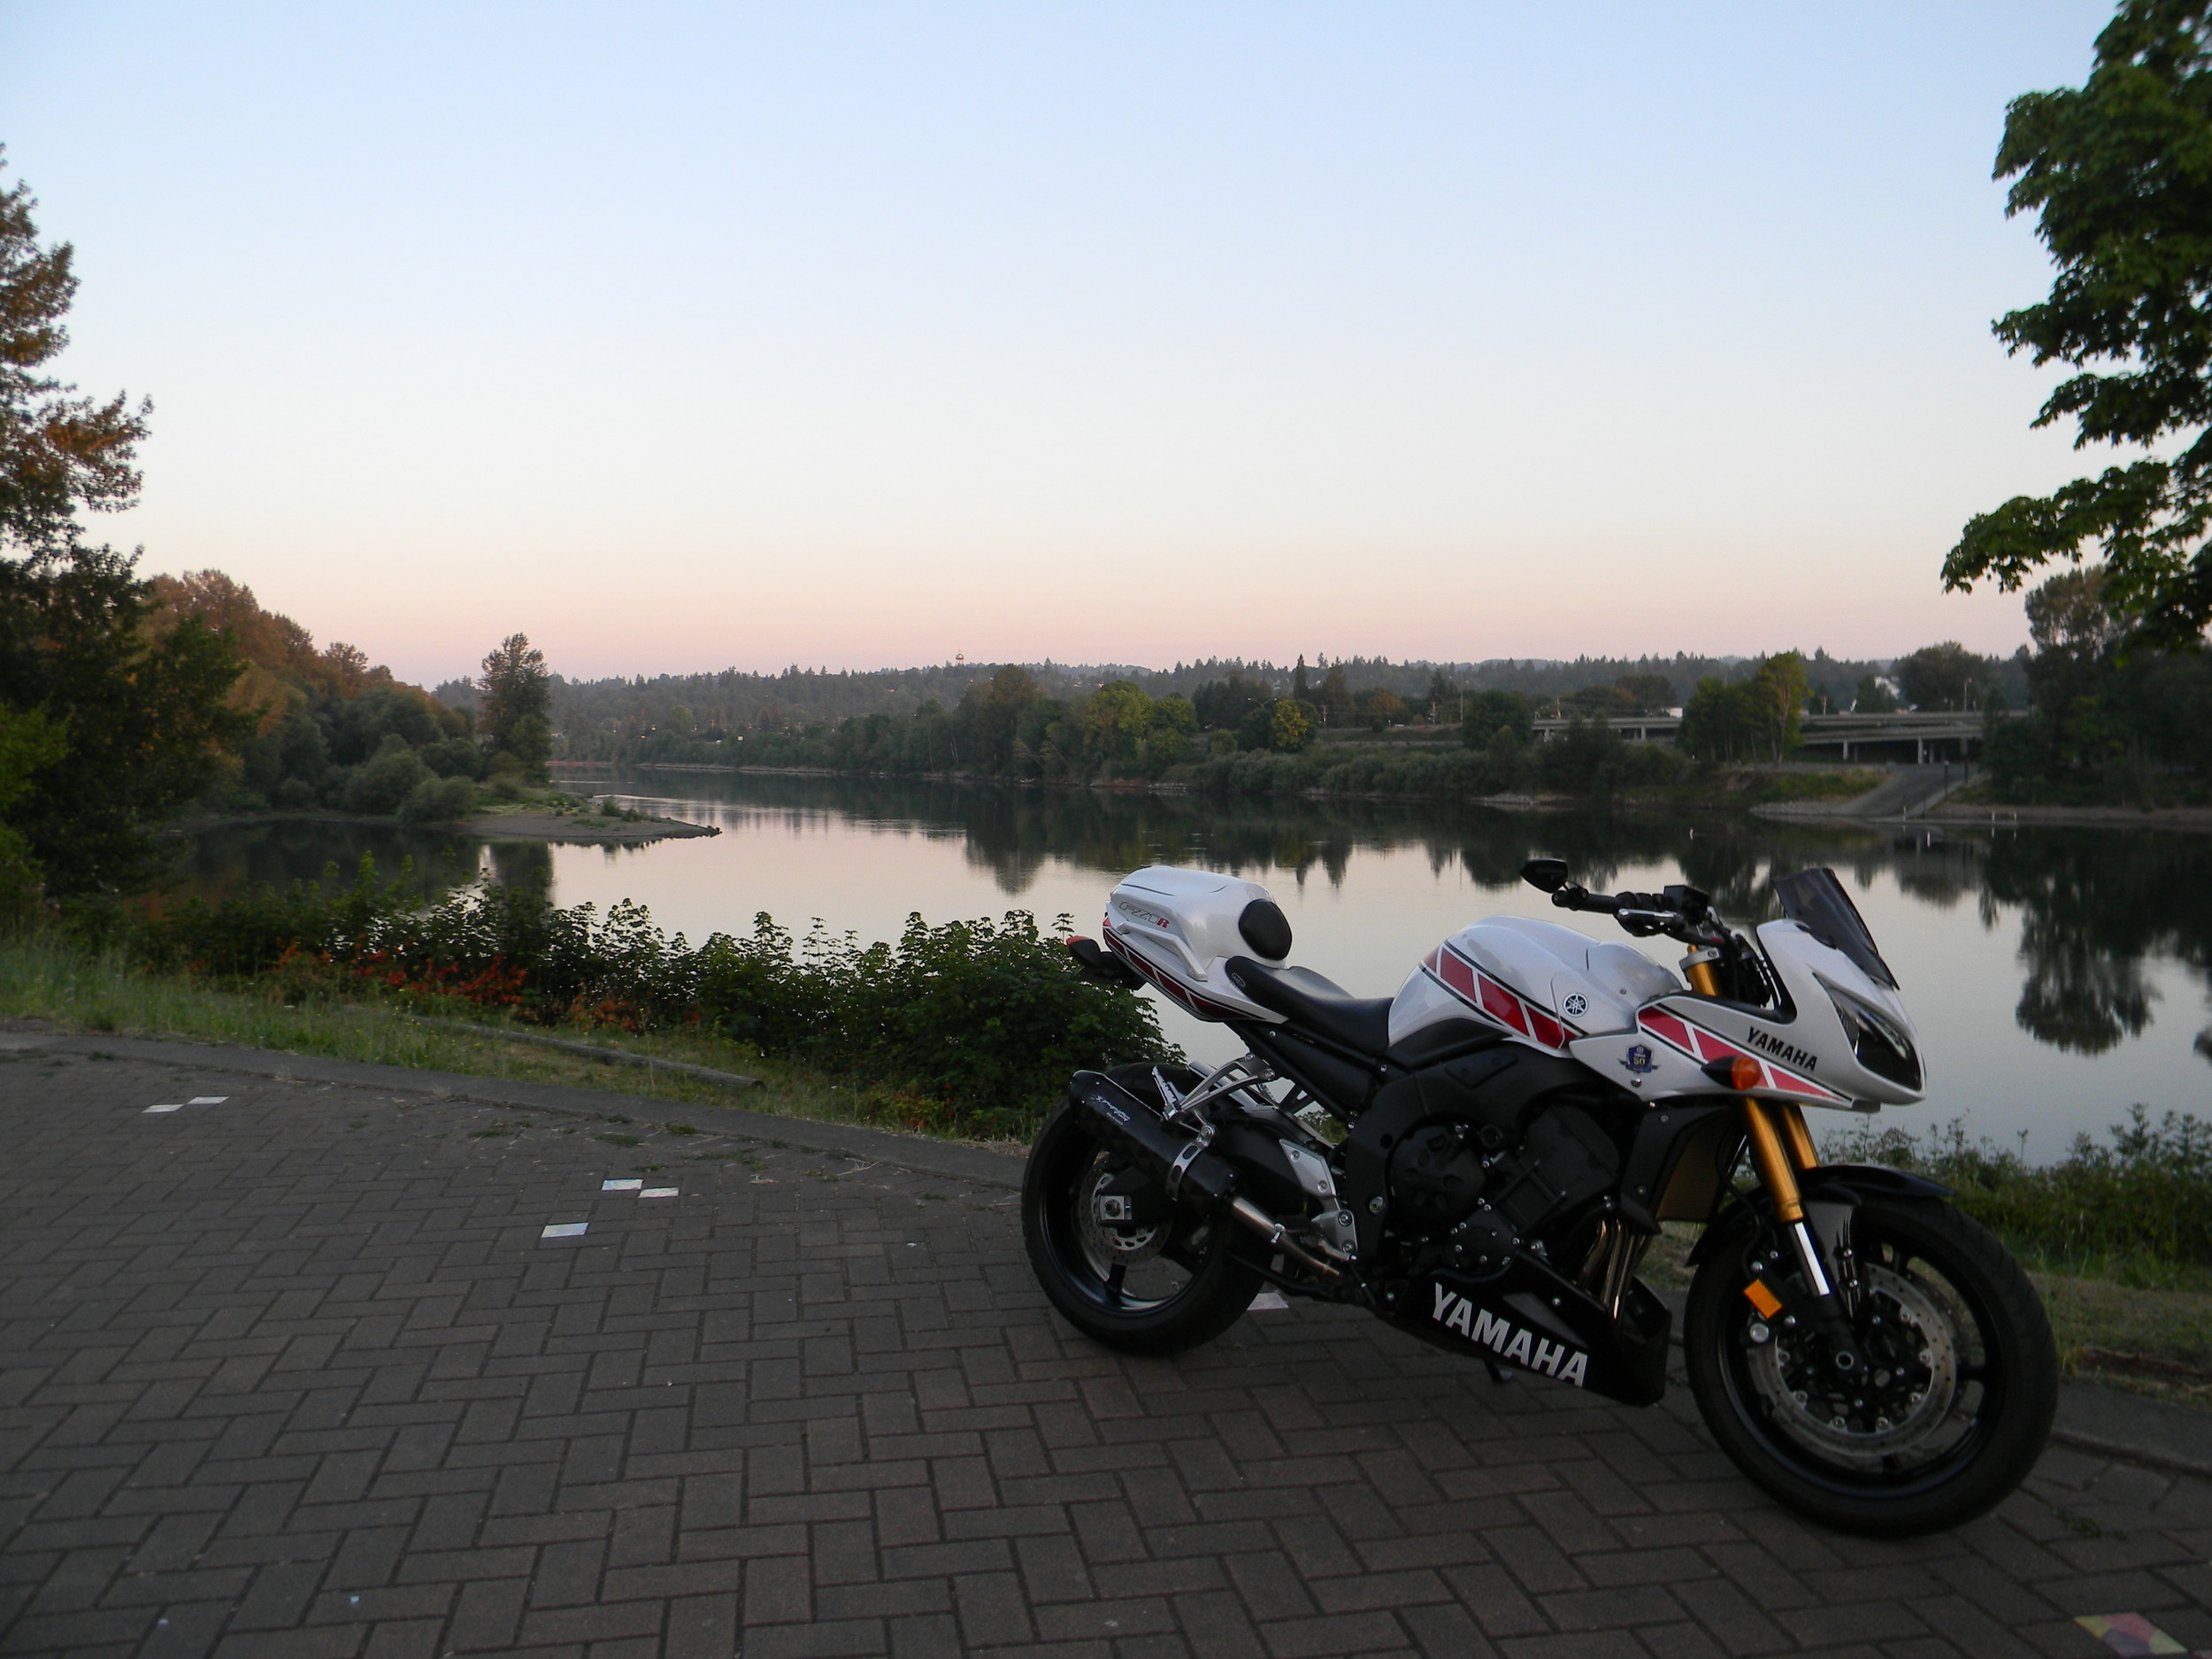 Retro FZ1 with Smuggler in front of Willamette River